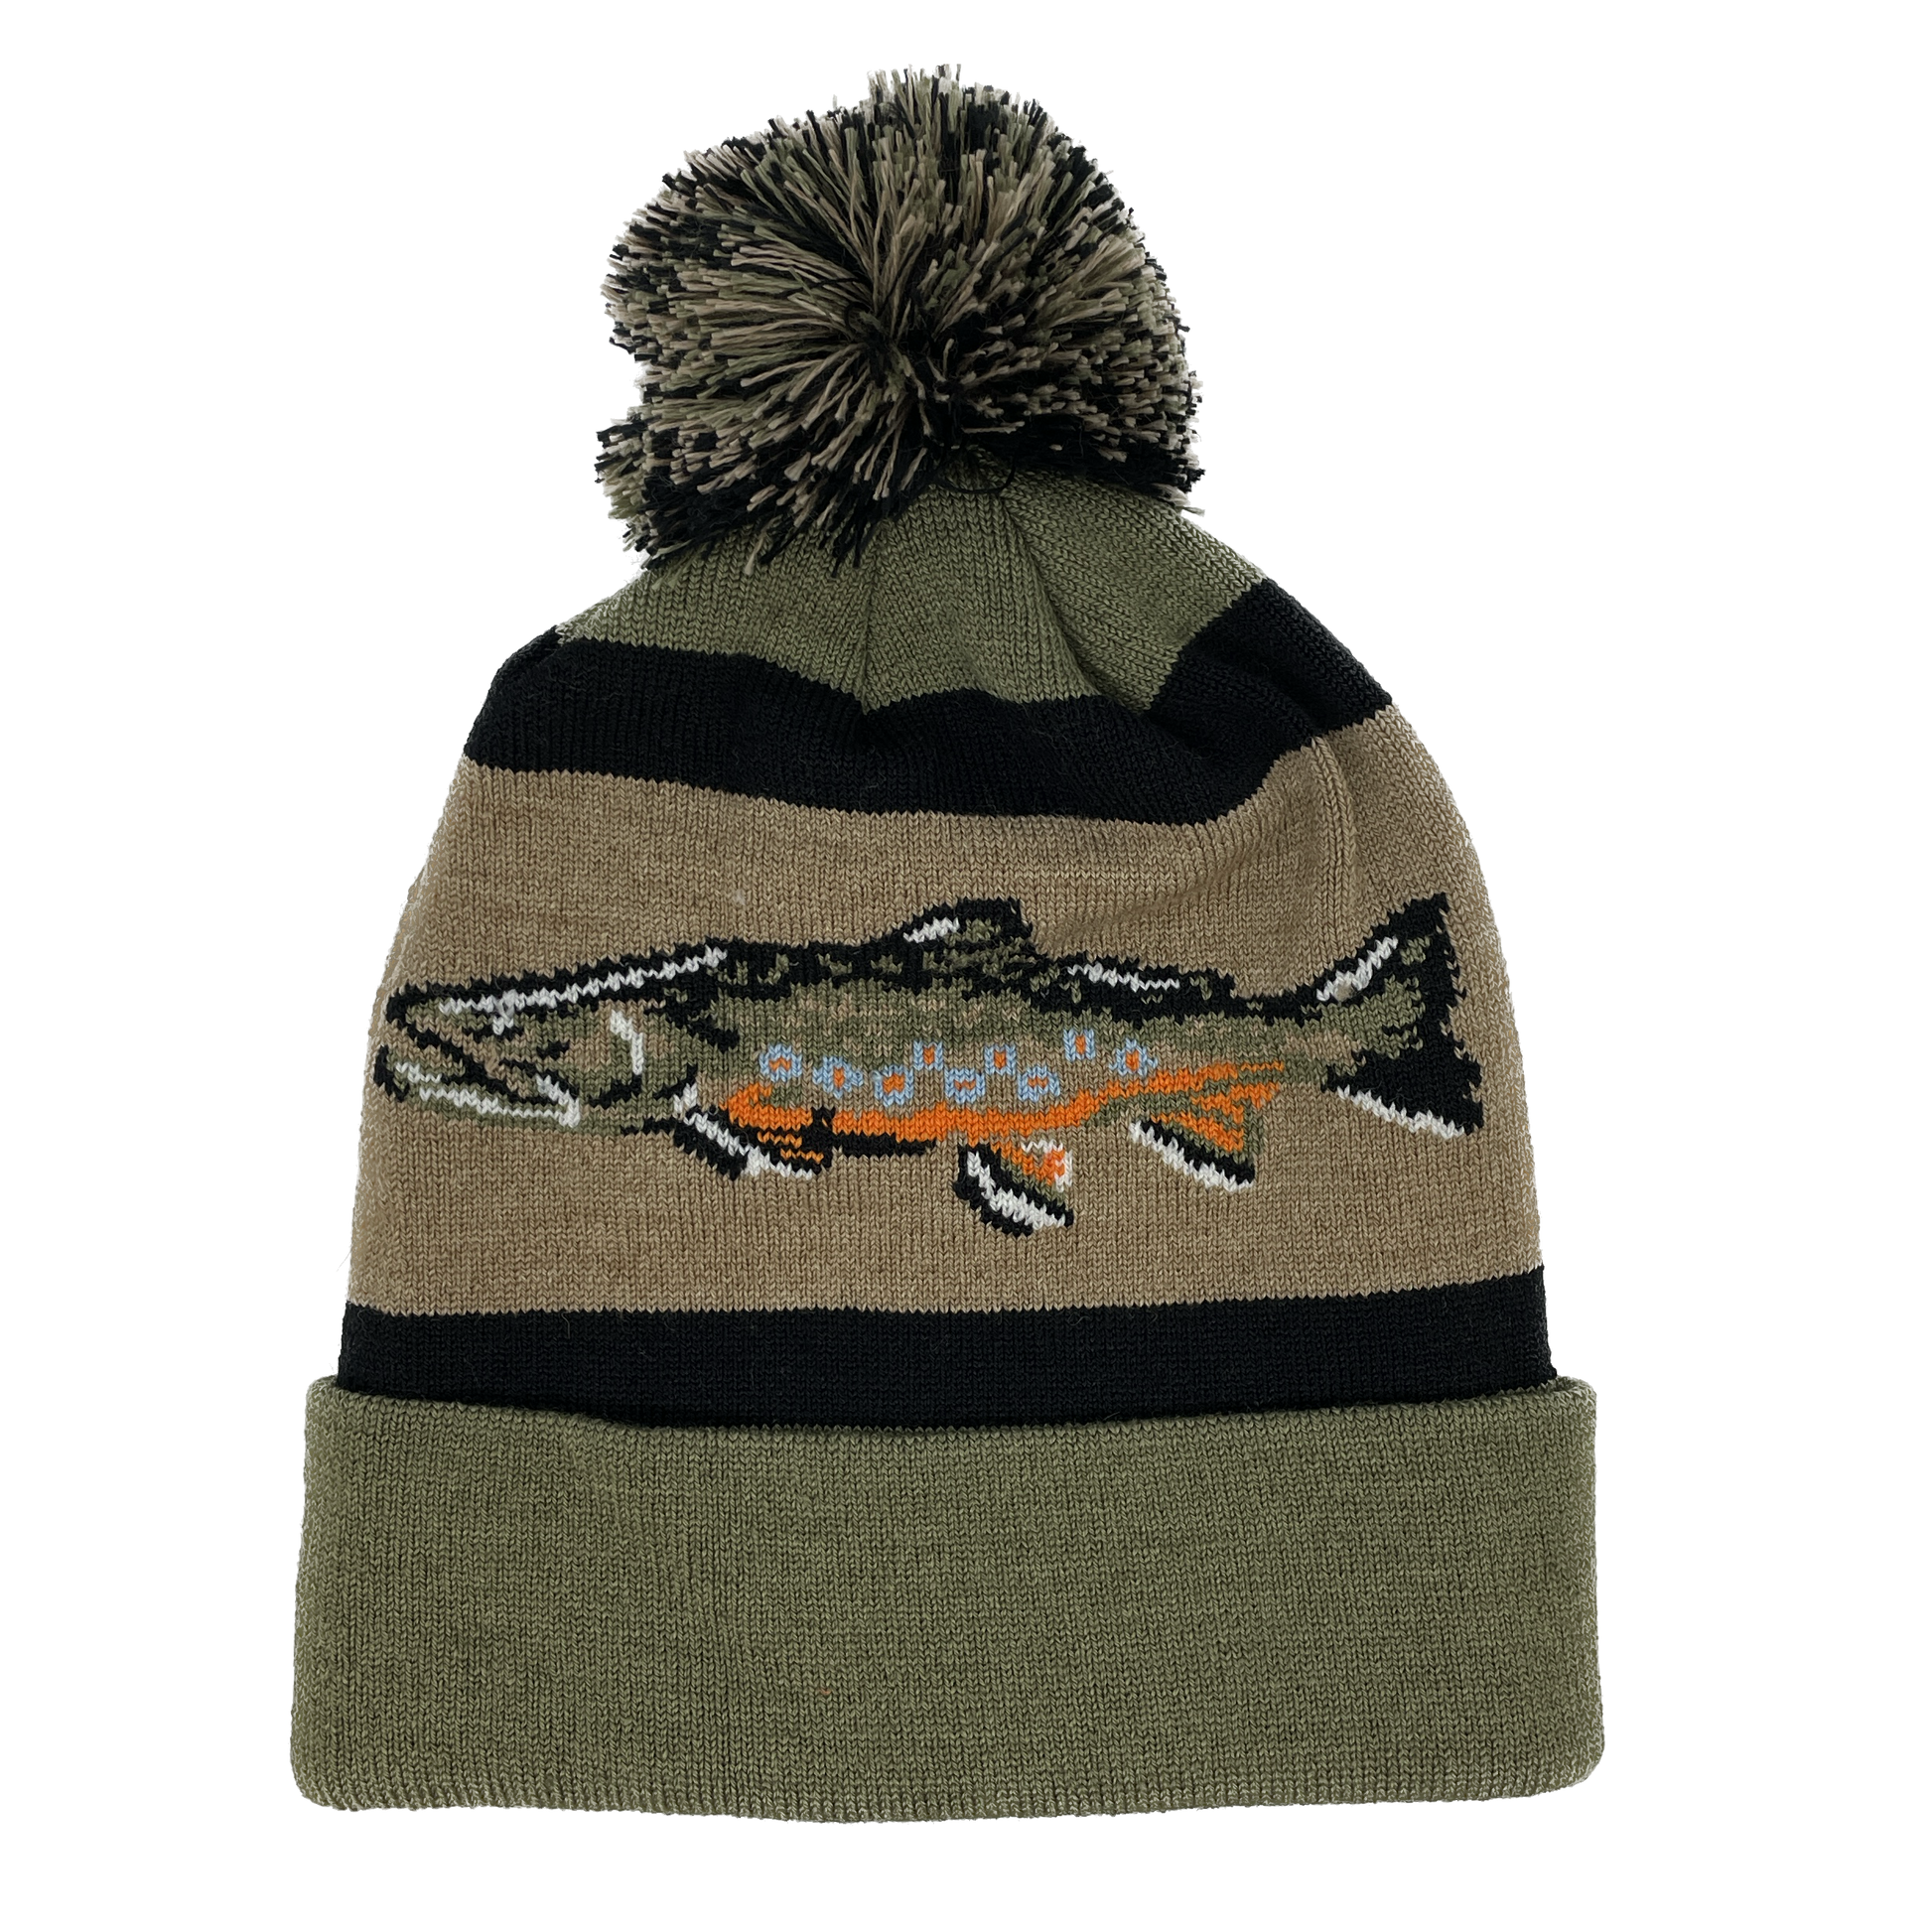 A winter hat with a green cuff shows a brook trout on the main area with a black stripe and multi colored poof on top